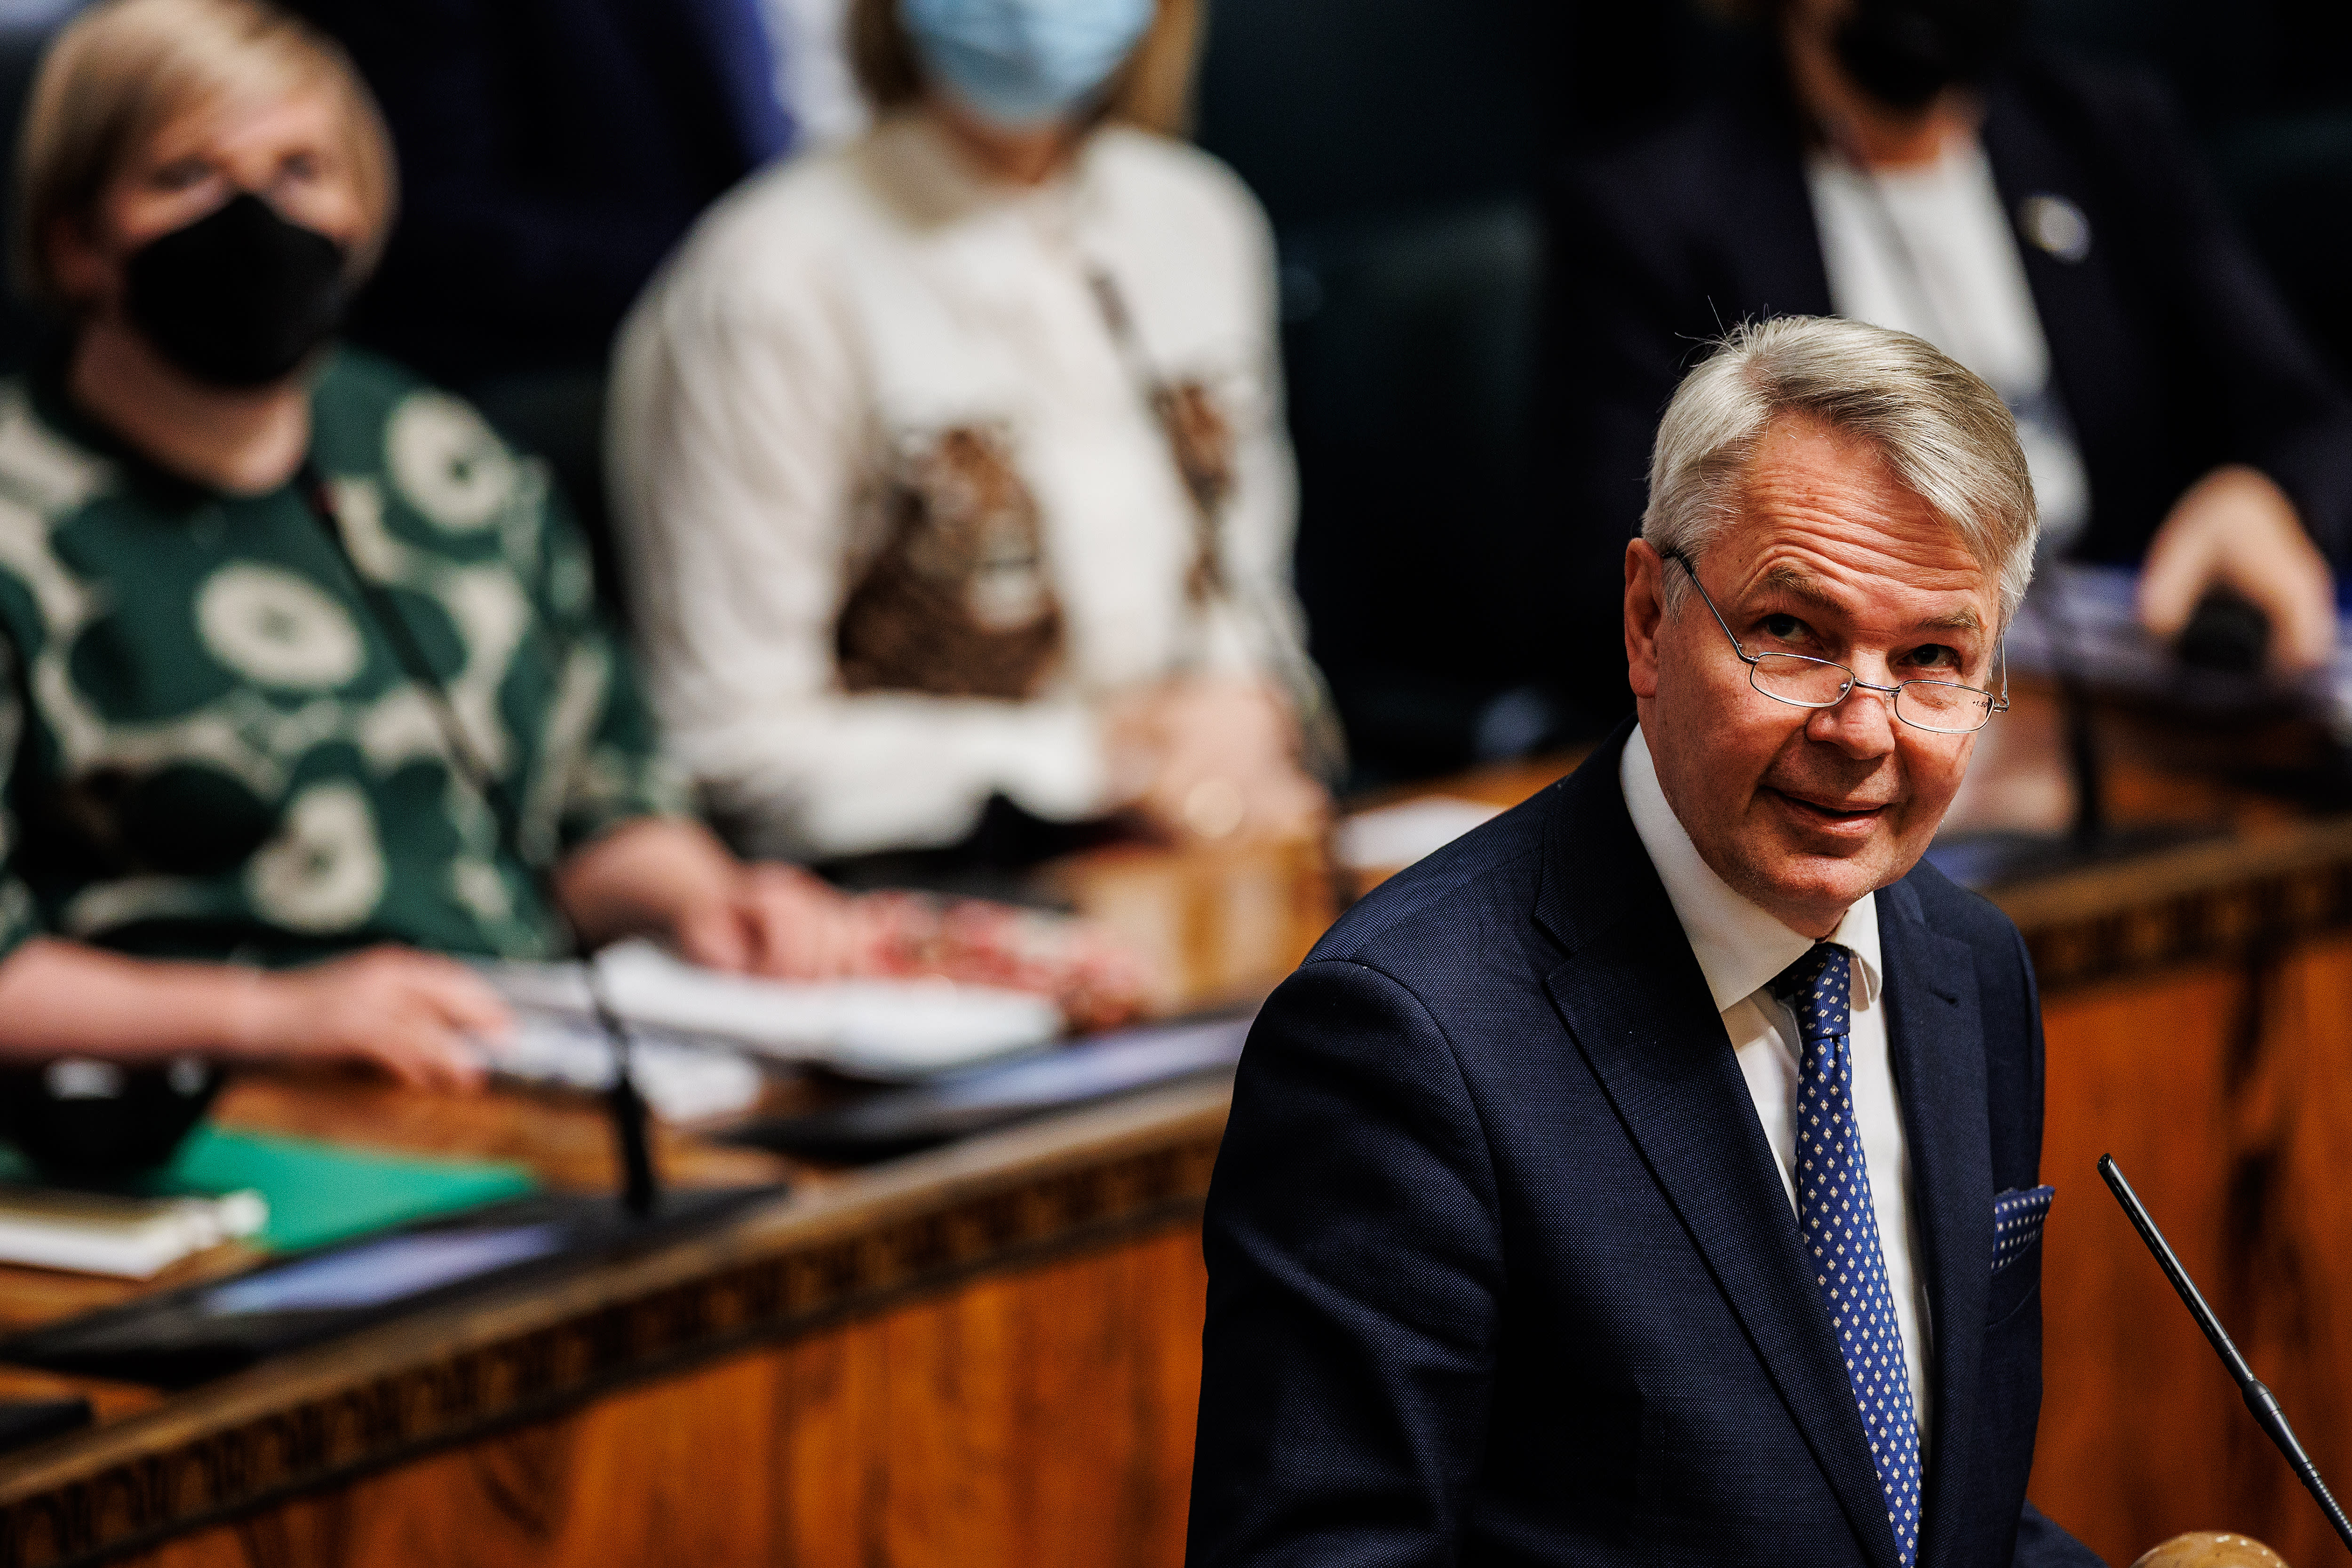 FM Haavisto: "No exact dates" NATO’s decision, but Finland, Sweden could announce within the same week